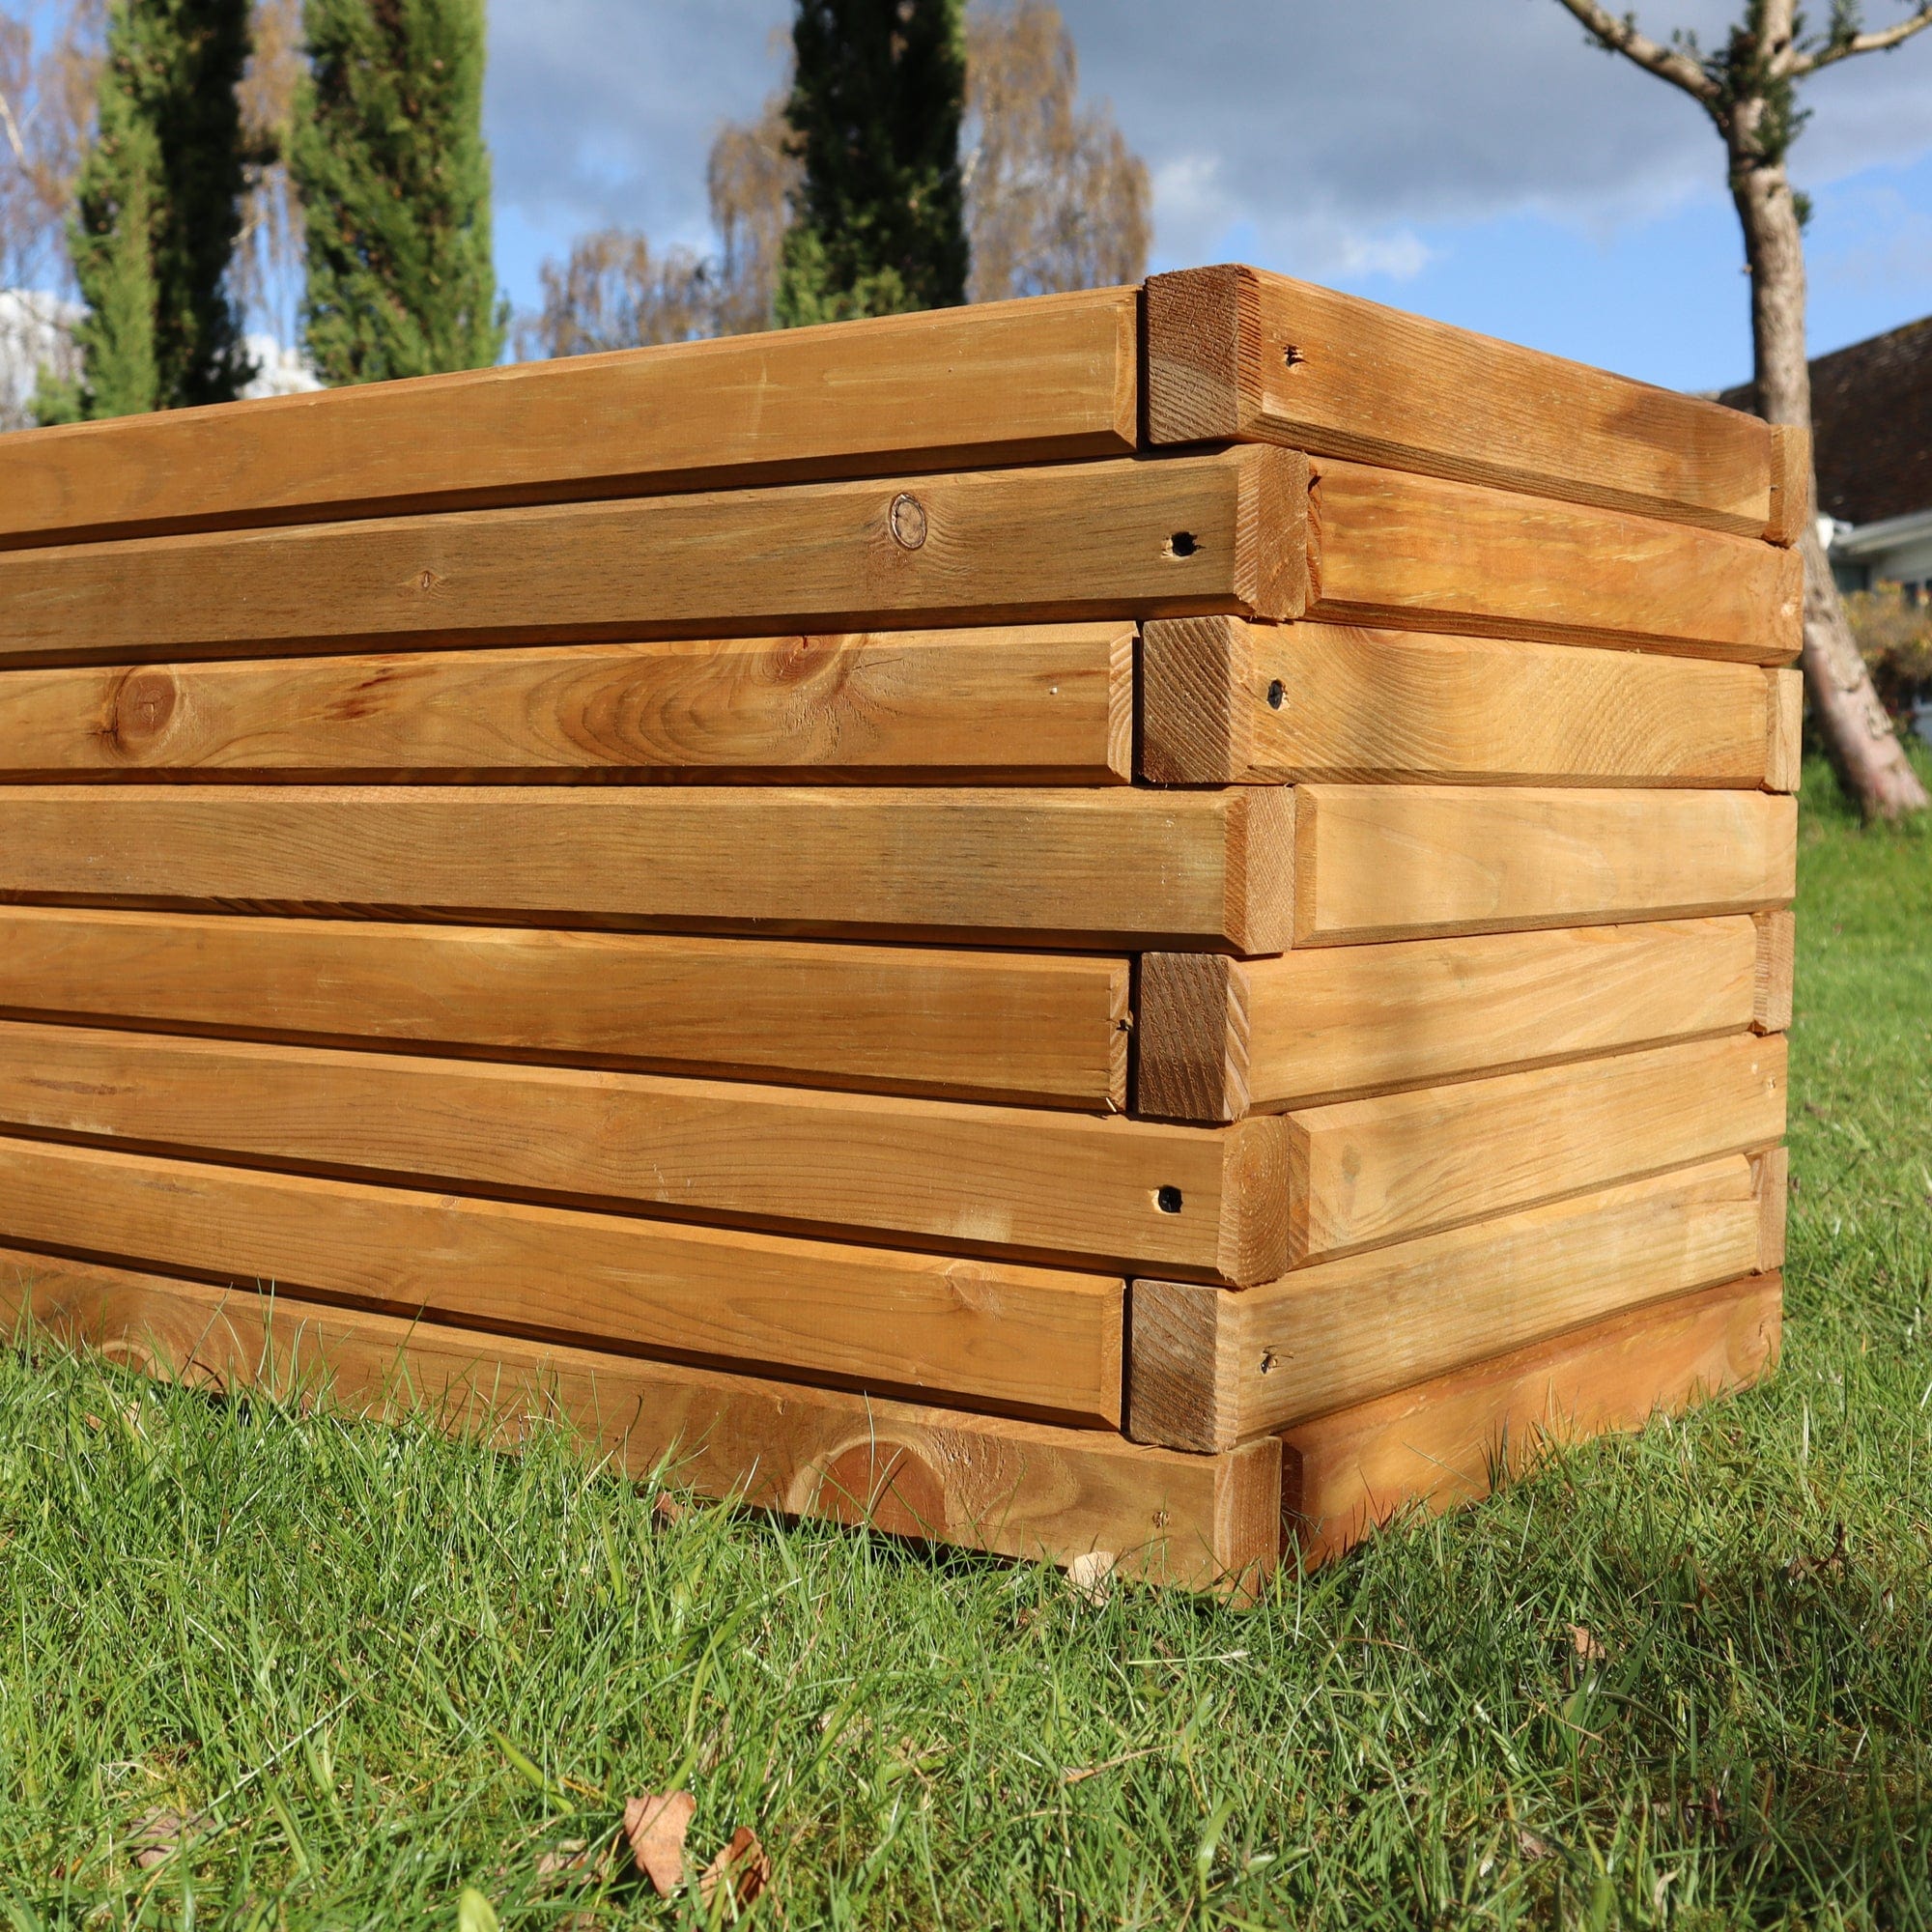 Wooden plant planters woods planter, large wooden garden planters, wooden flower trough 1.2m long by Woven Wood